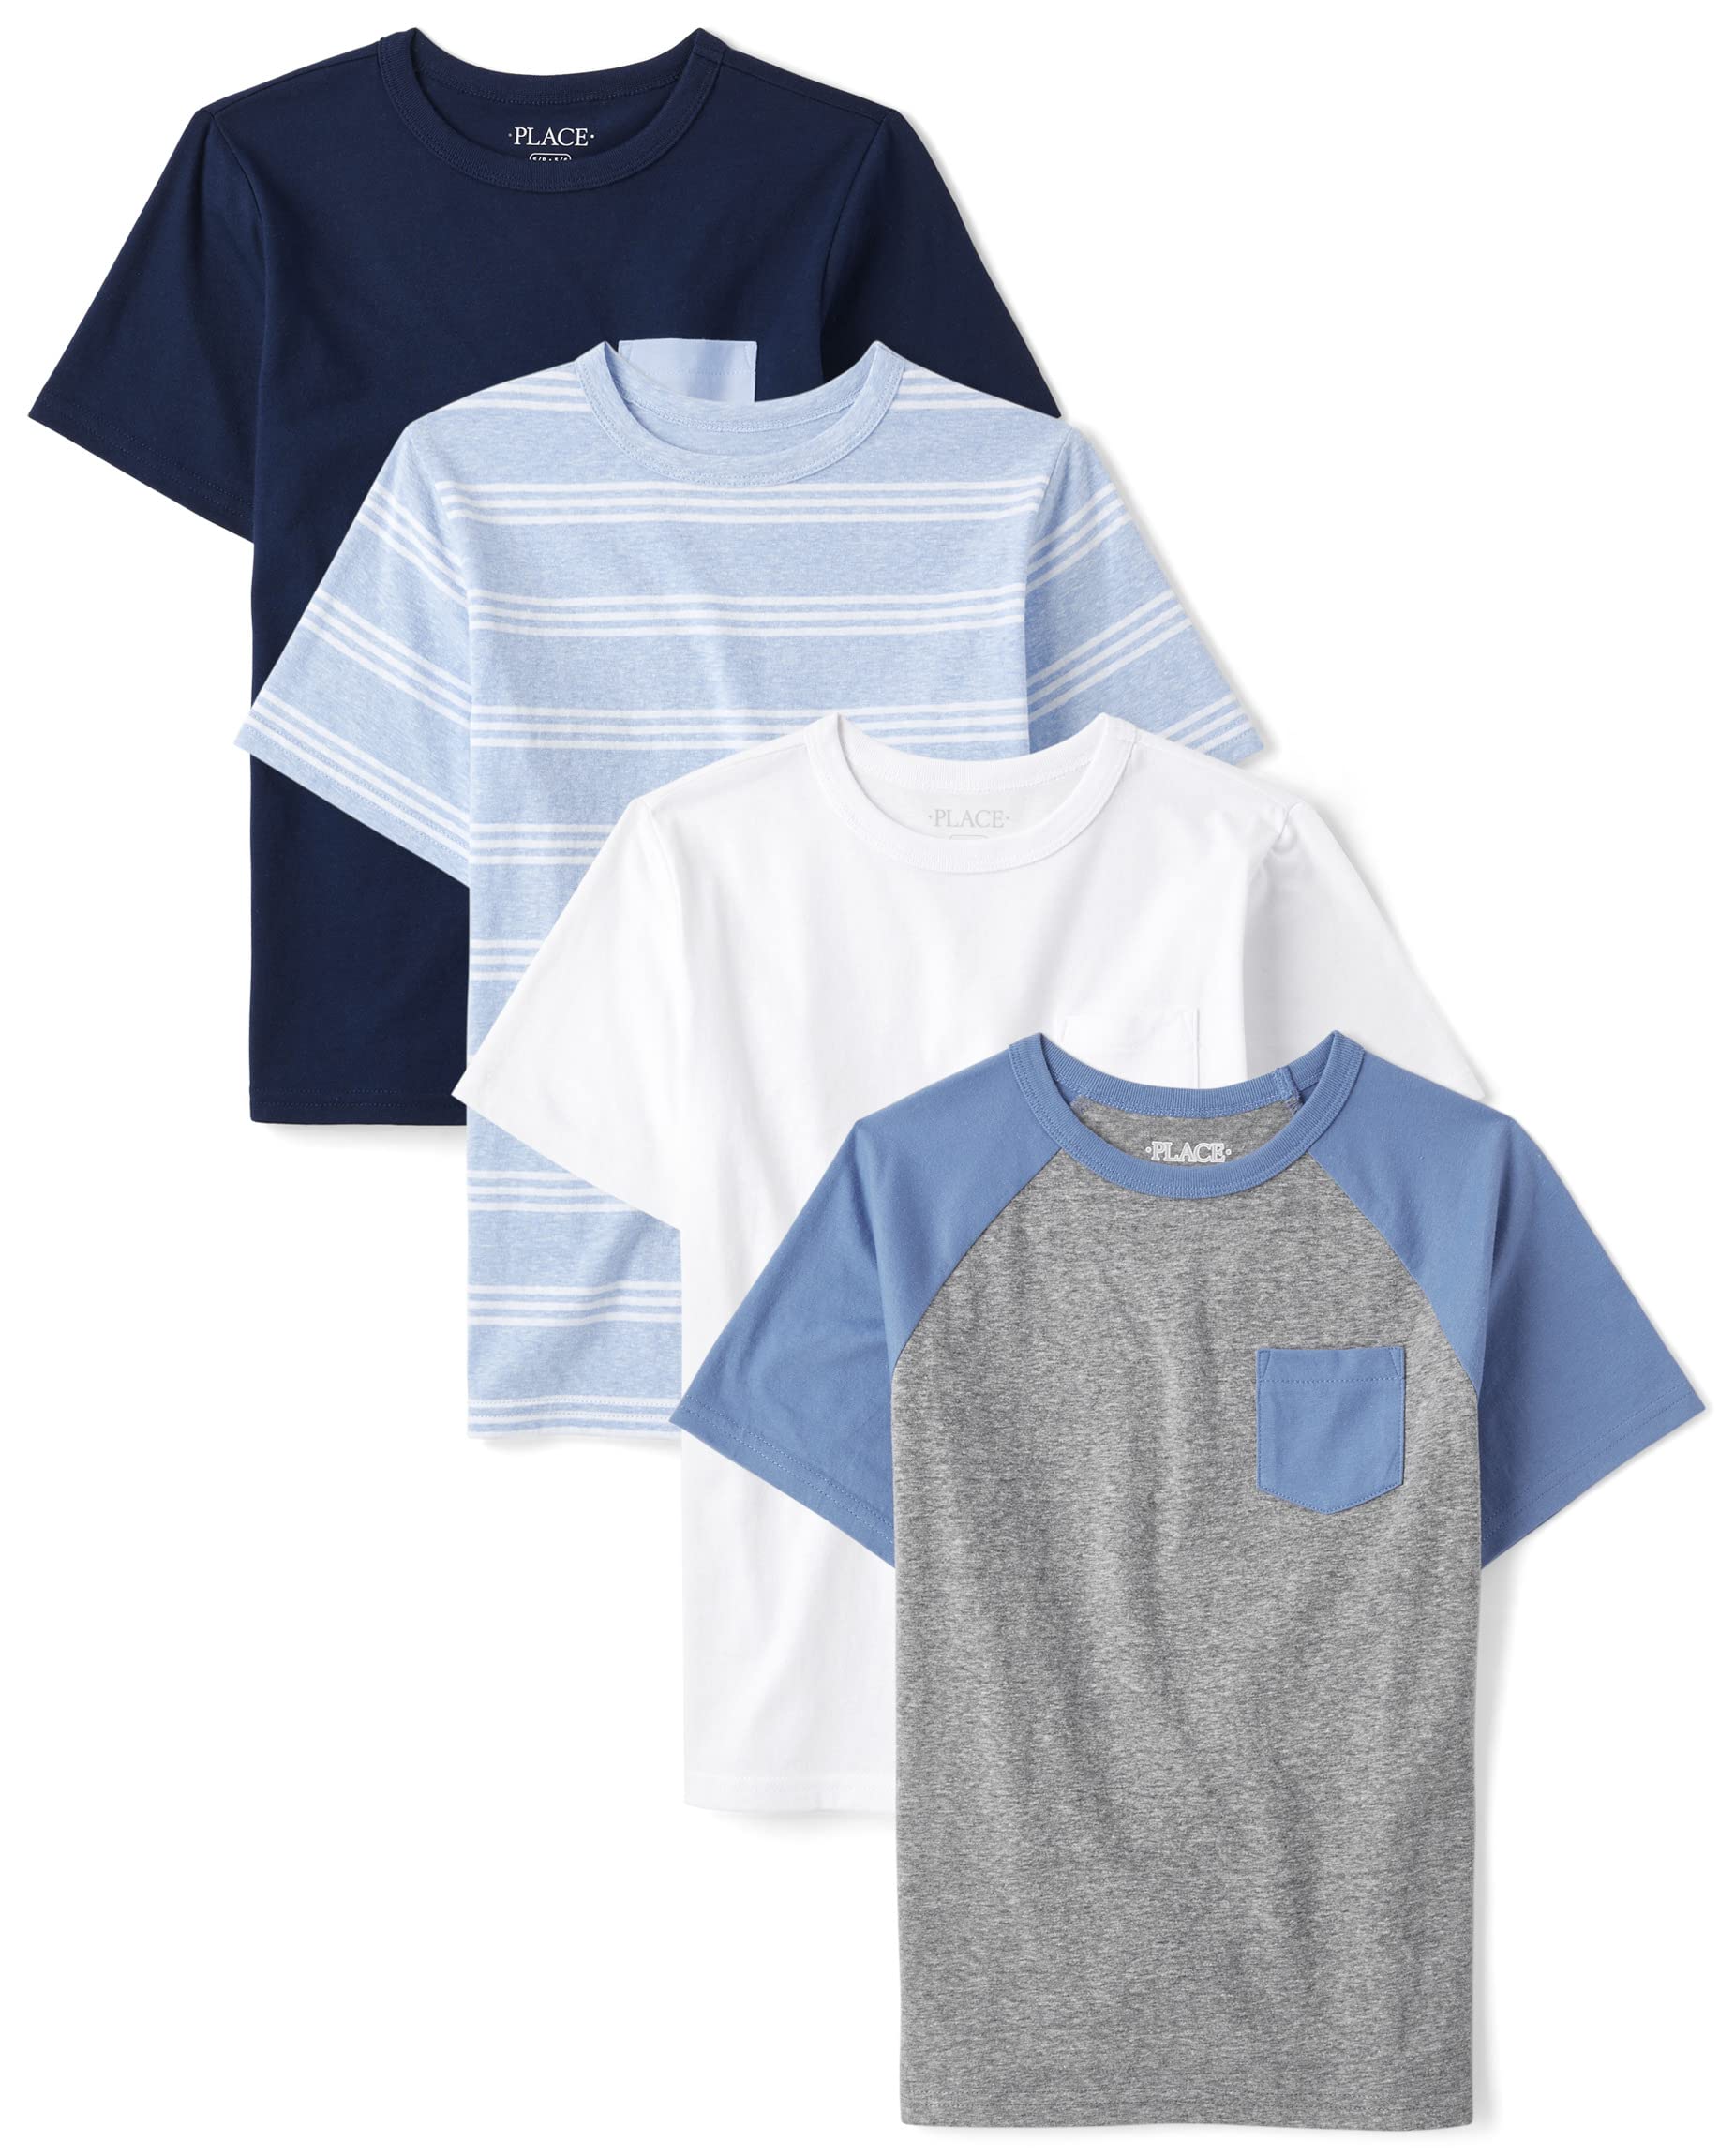 The Children's Place Boys' Short Sleeve Layering Tee 4-Pack